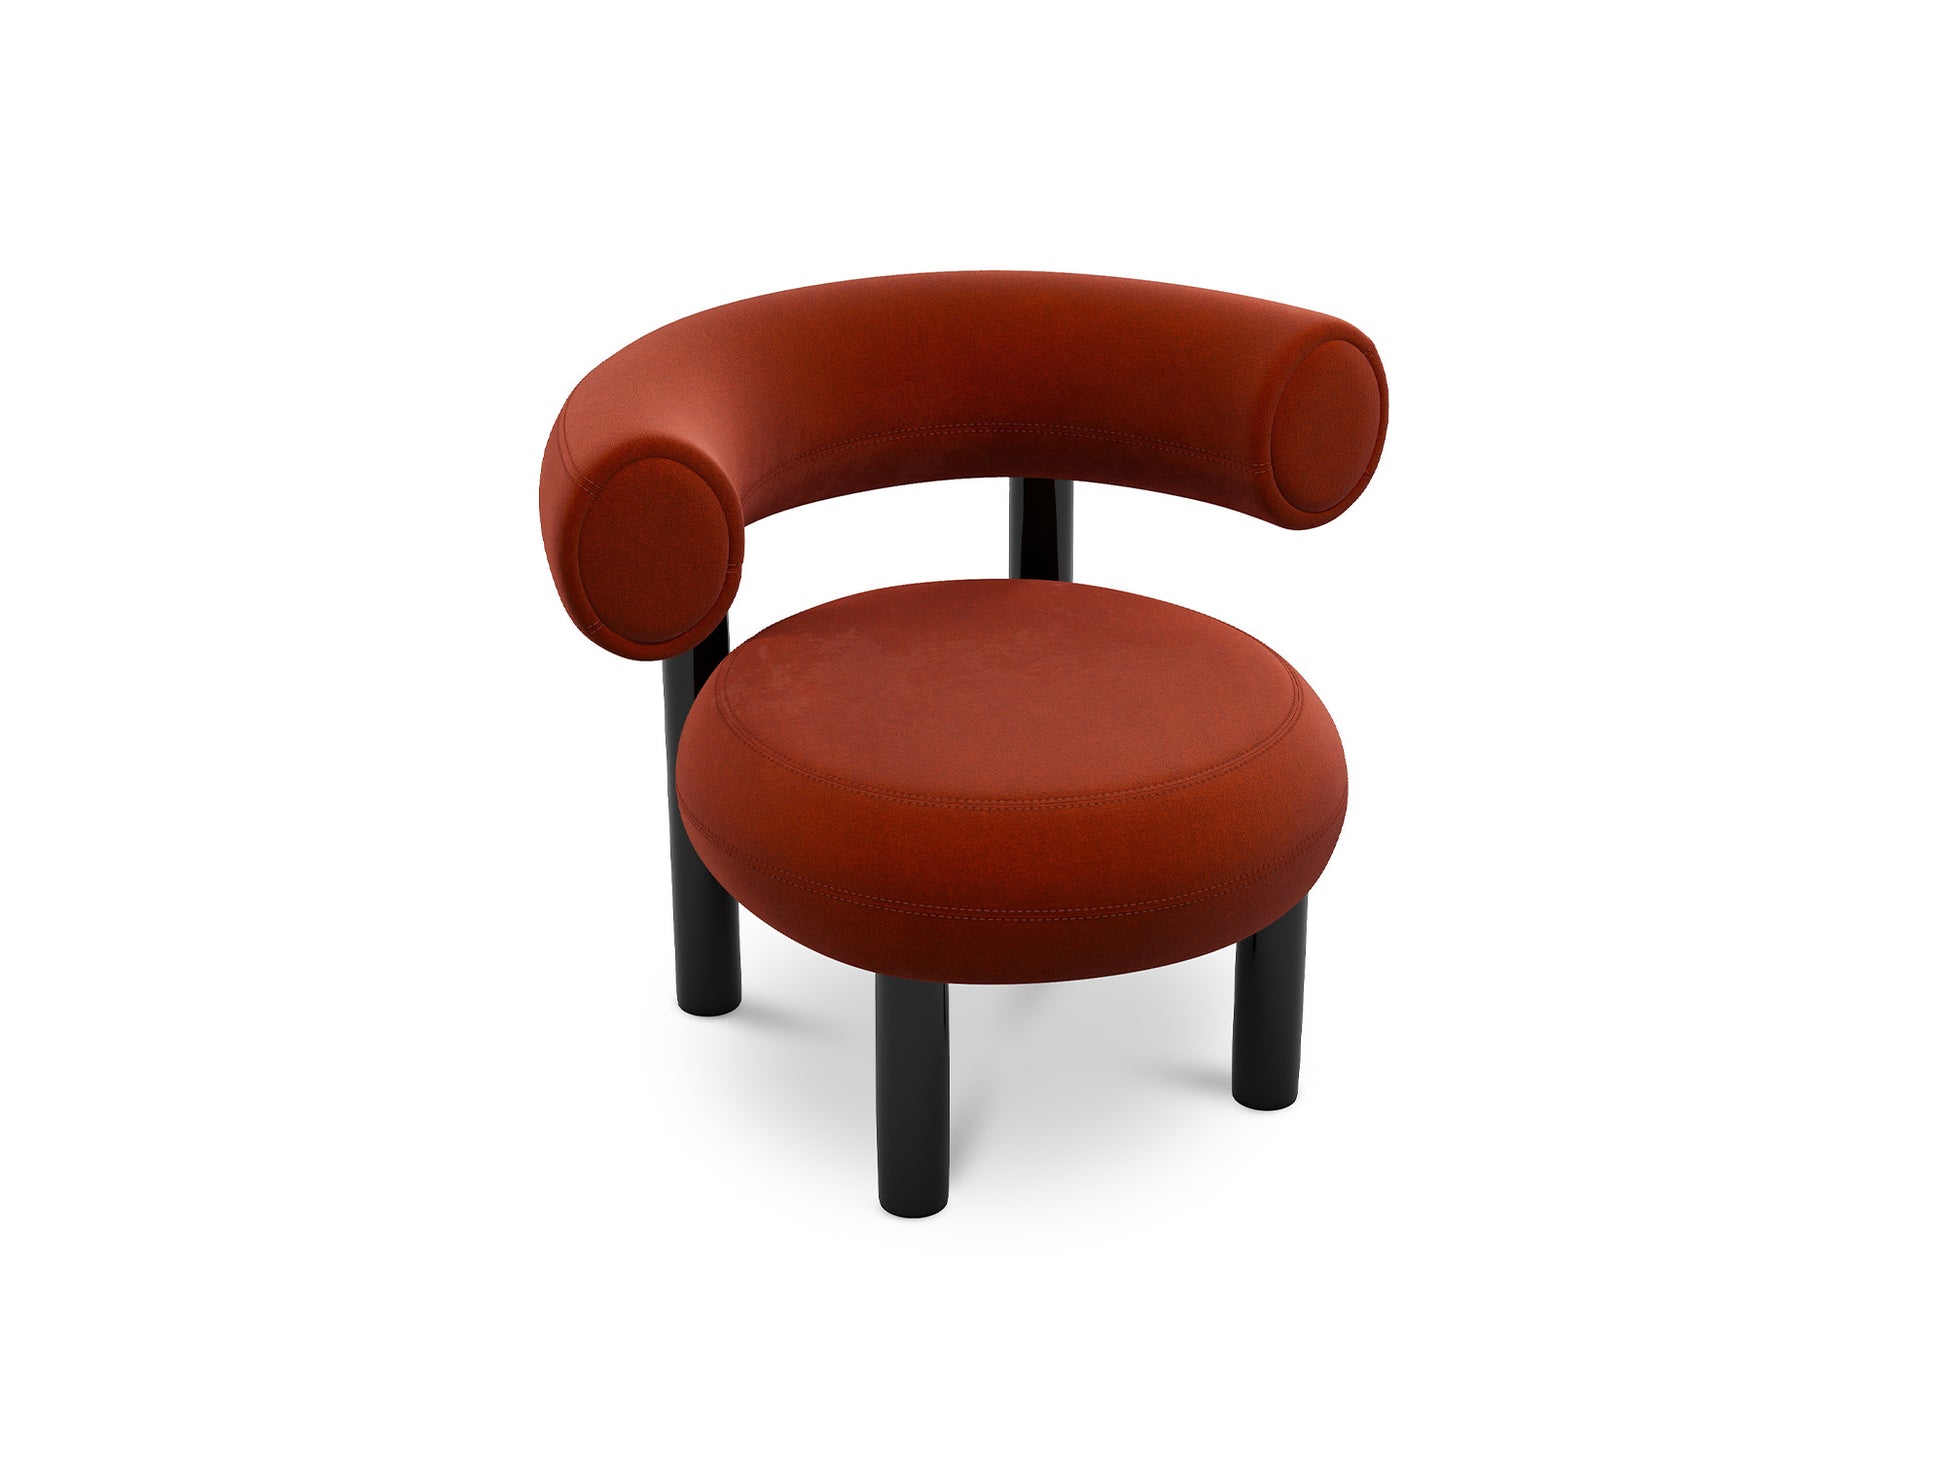 Fat Lounge Chair by Tom Dixon - Gentle 2 373